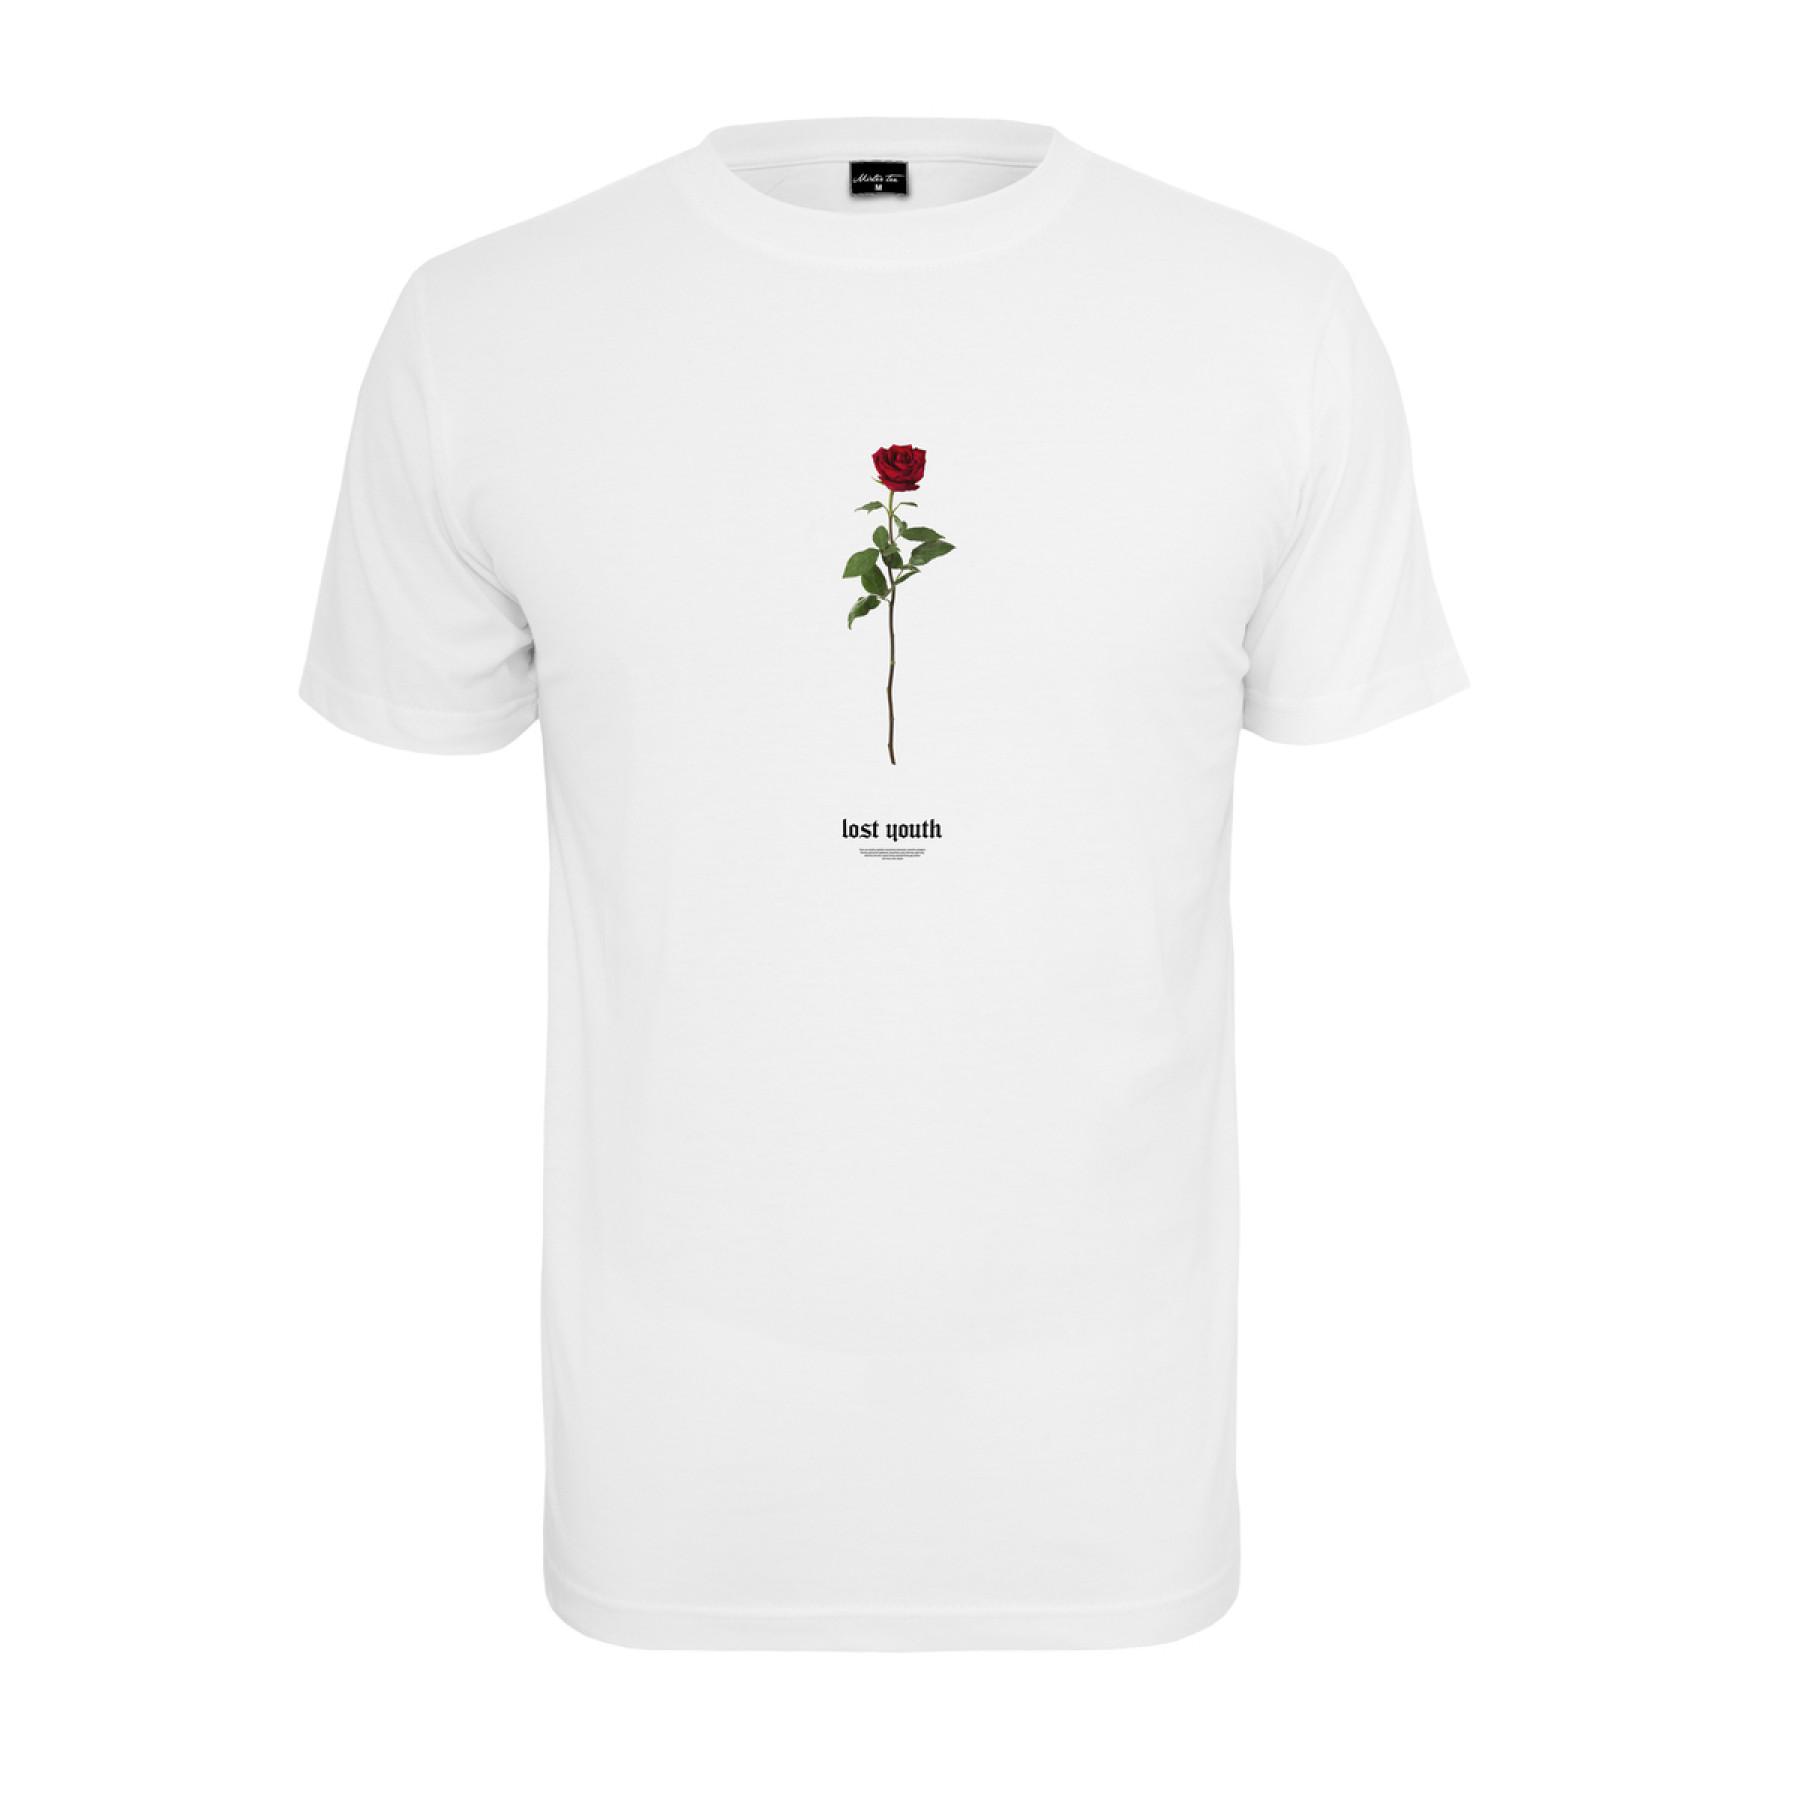 T-shirt Mister Tee lost youth rose tee